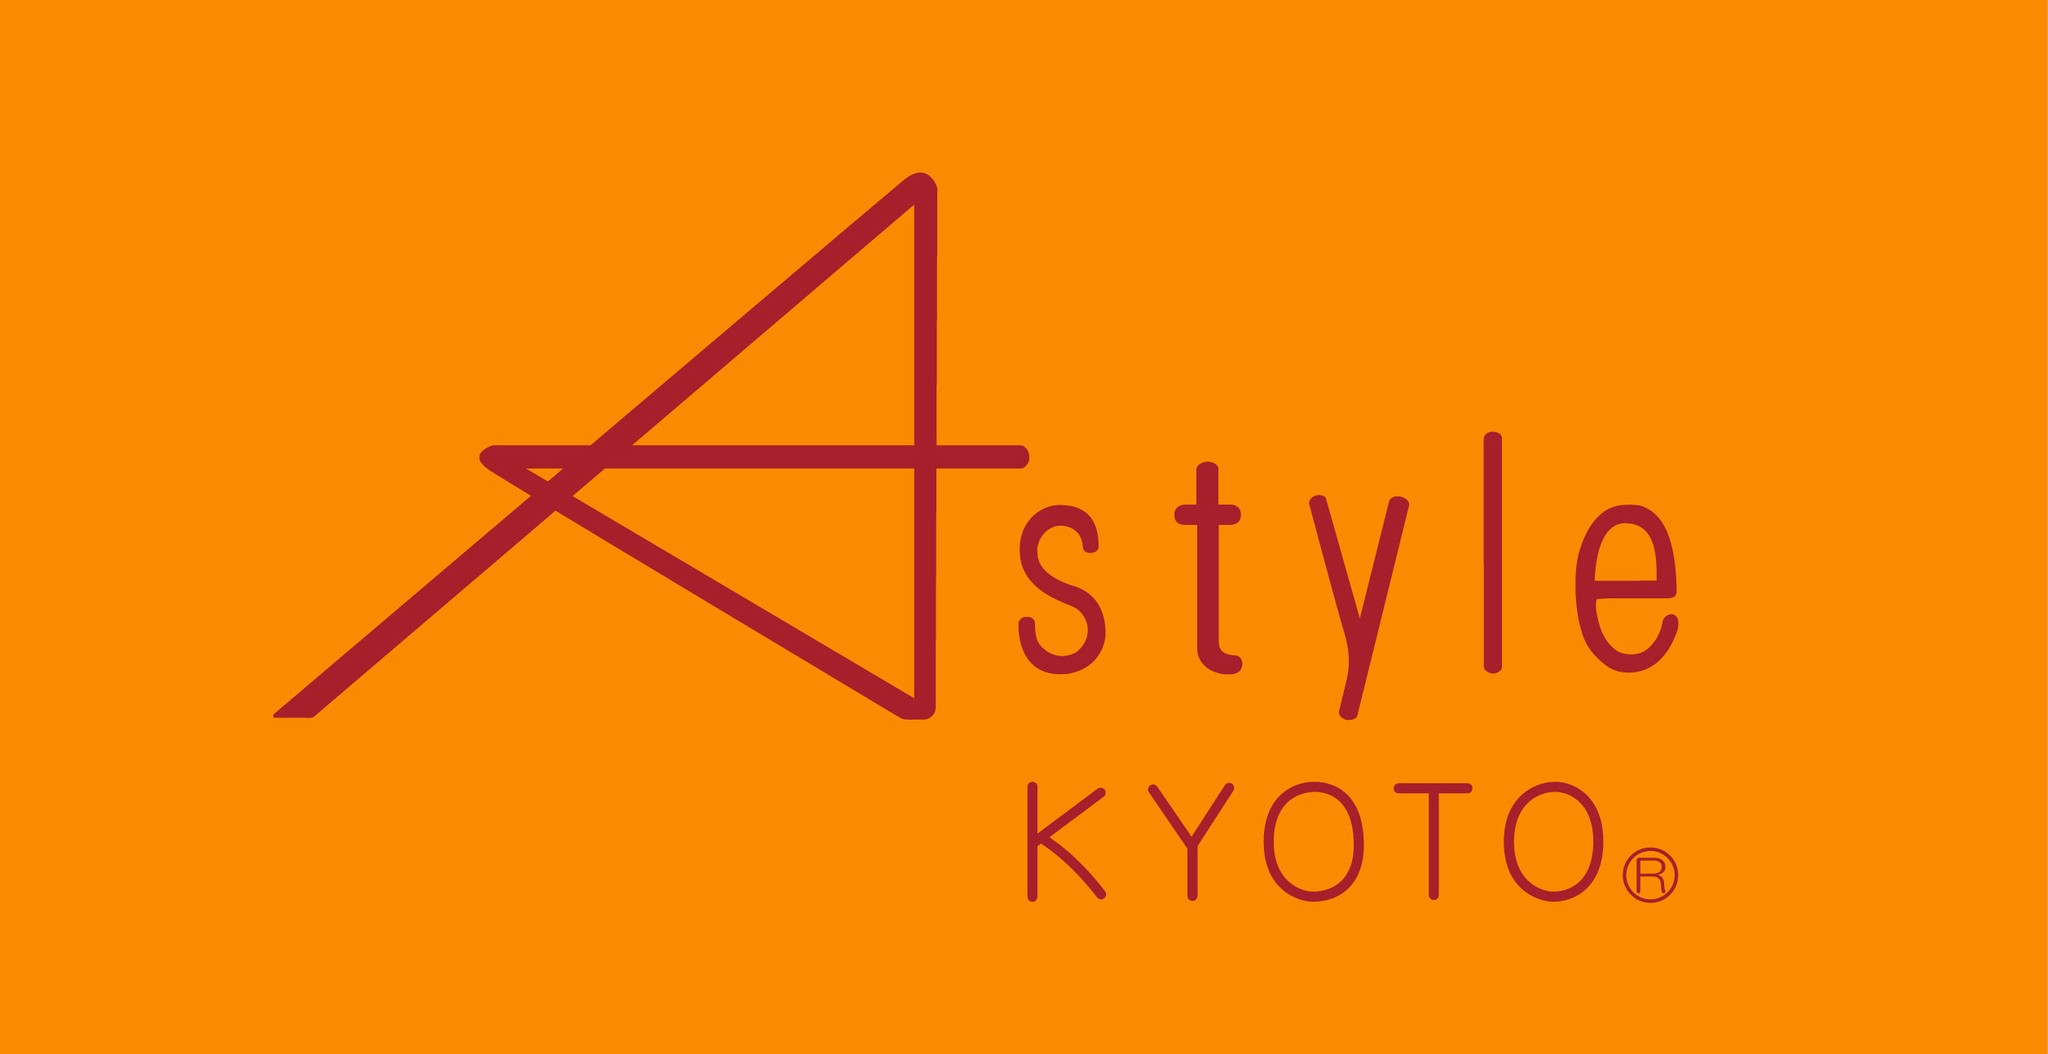 A-style　KYOTO